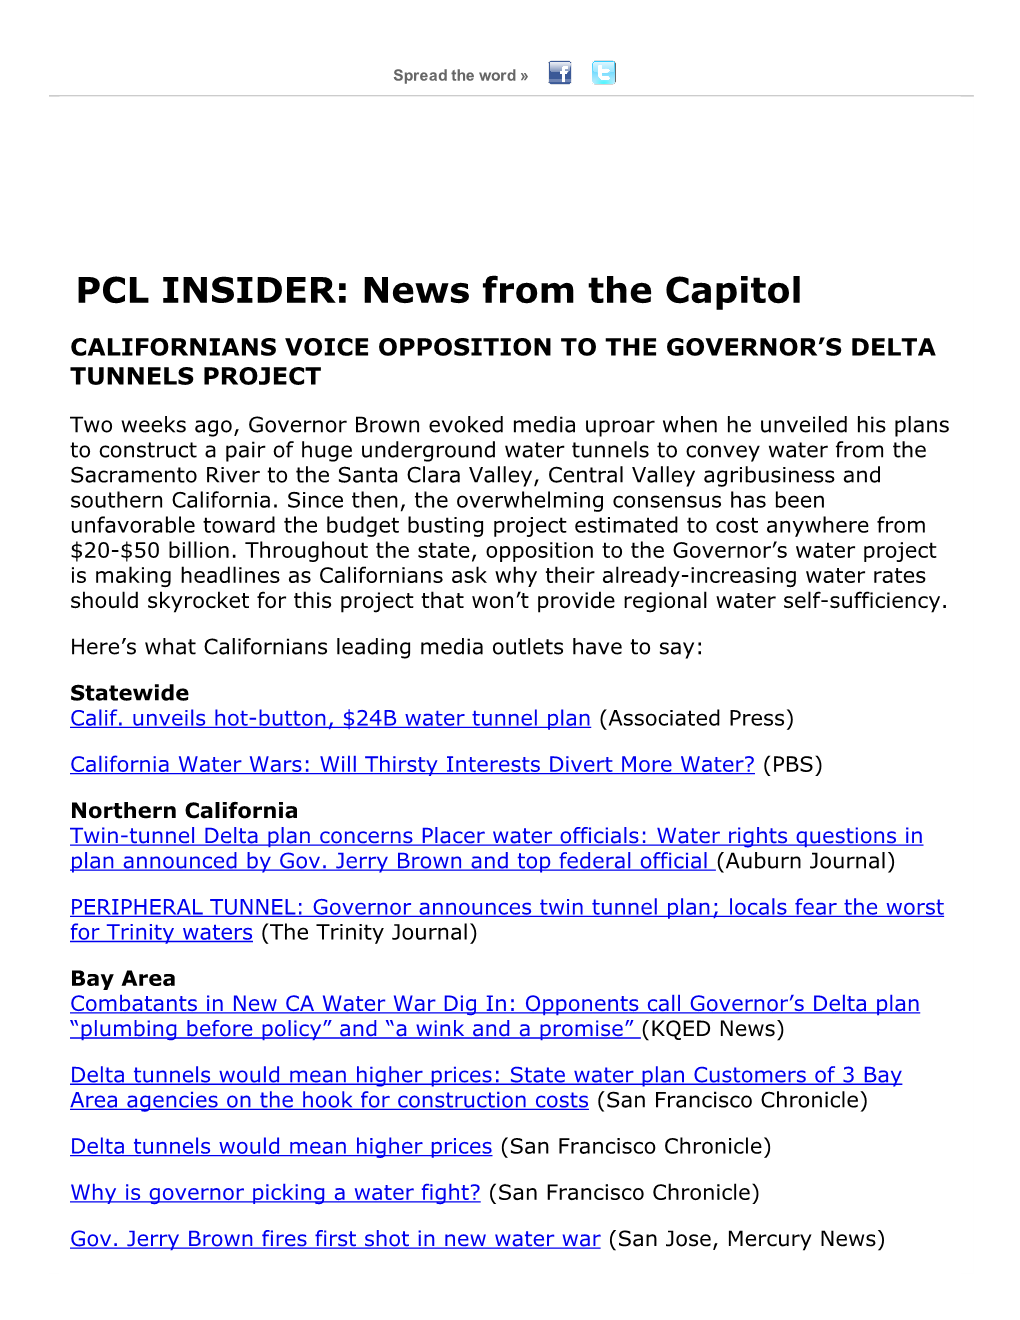 PCL INSIDER: News from the Capitol